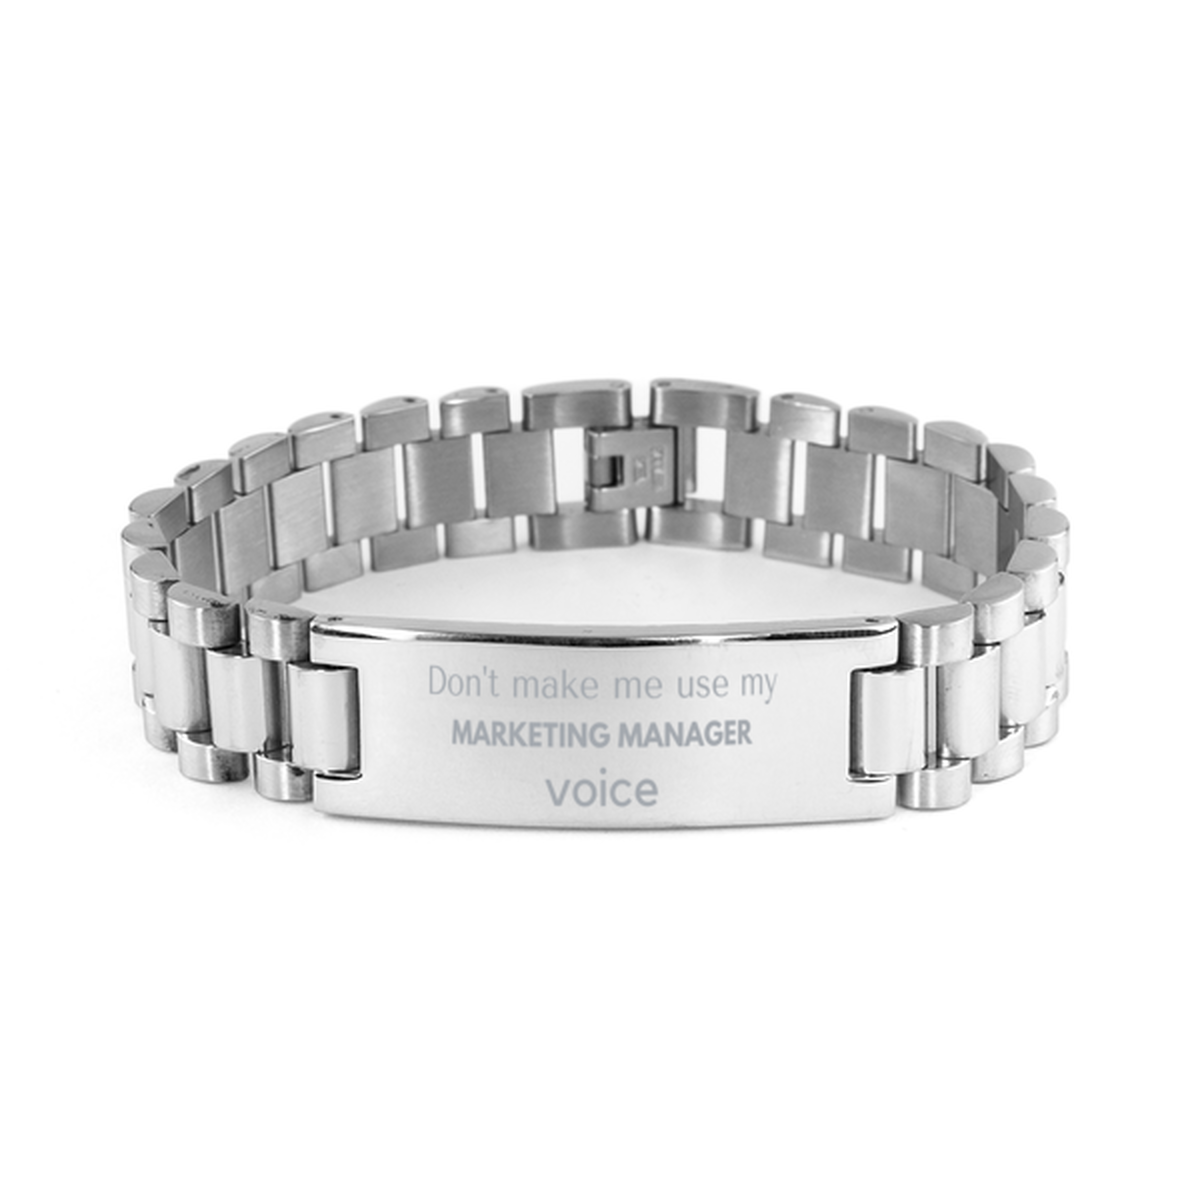 Don't make me use my Marketing Manager voice, Sarcasm Marketing Manager Gifts, Christmas Marketing Manager Ladder Stainless Steel Bracelet Birthday Unique Gifts For Marketing Manager Coworkers, Men, Women, Colleague, Friends